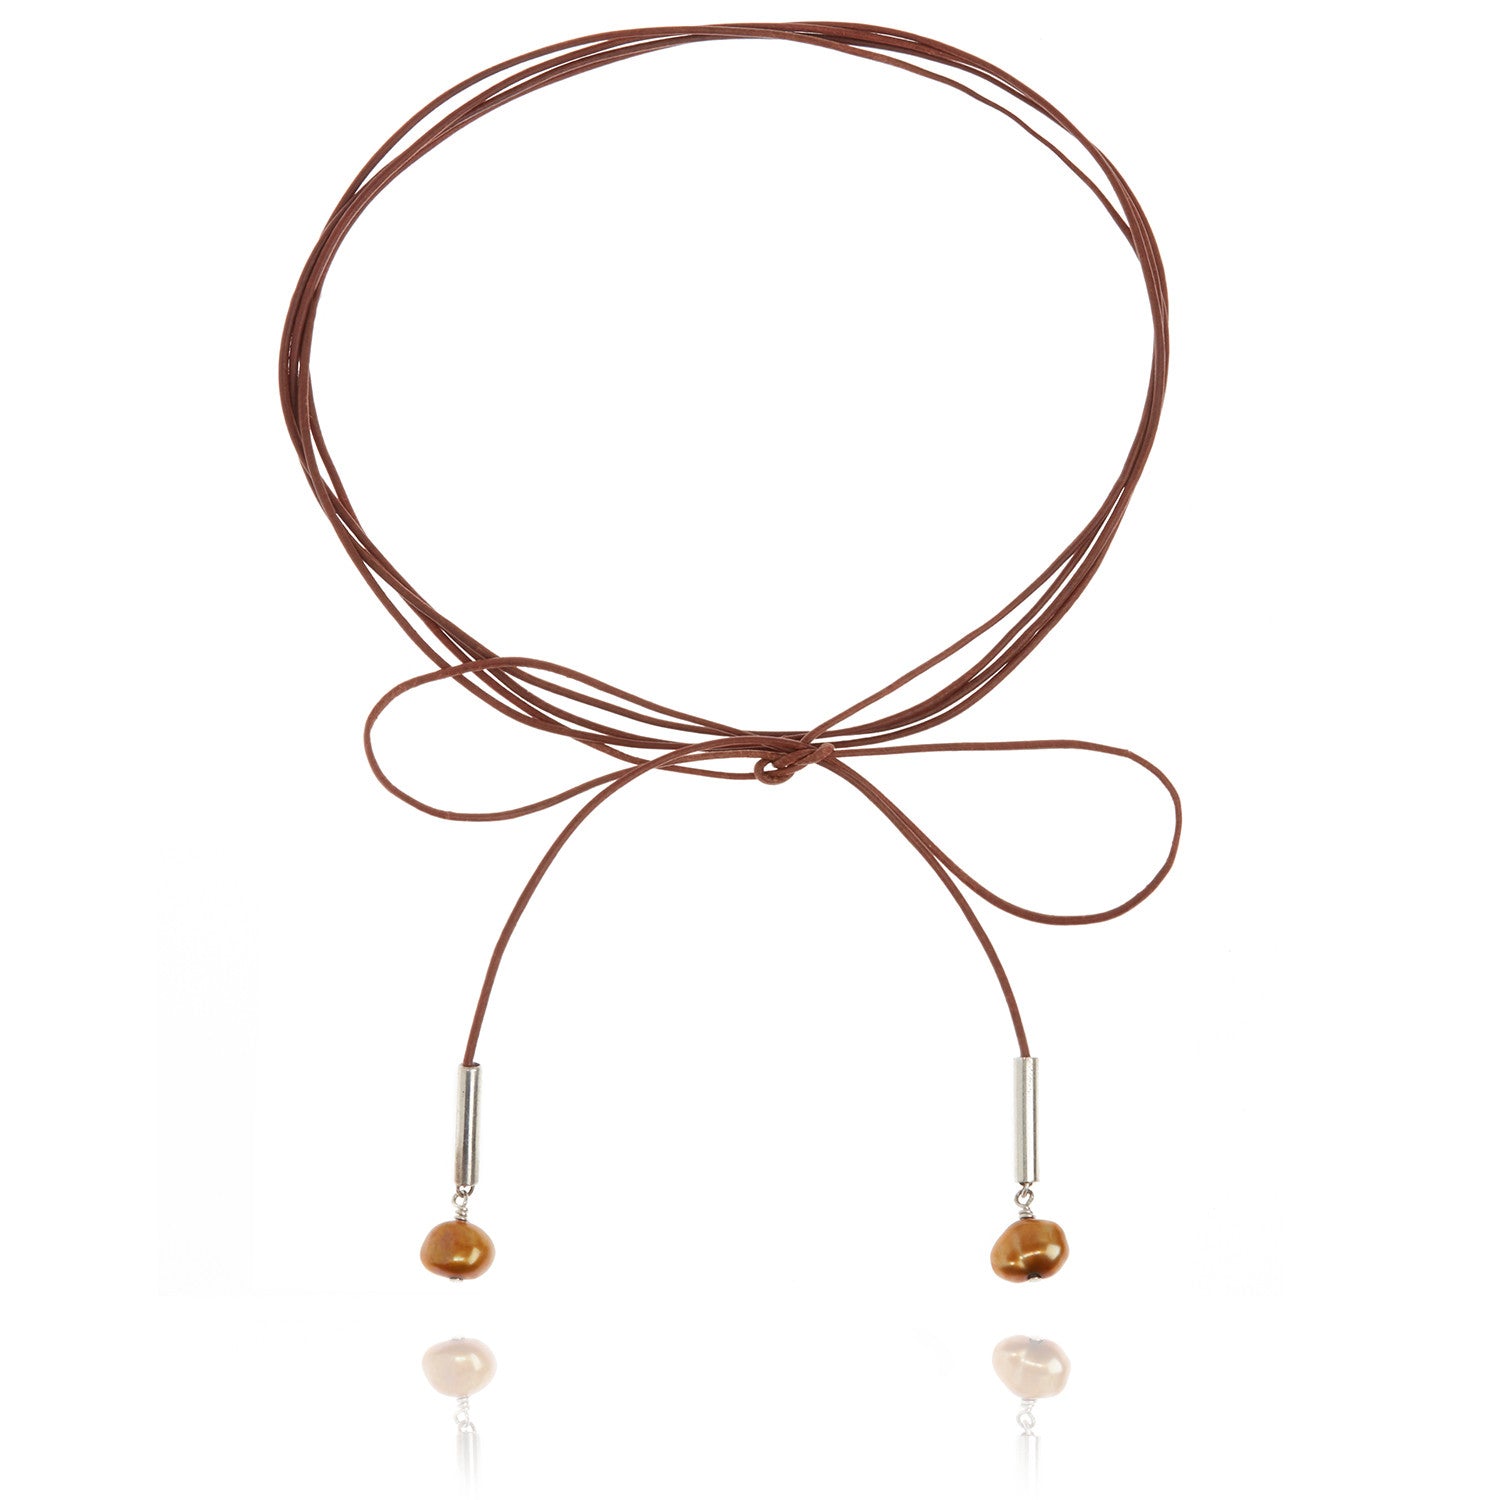 Joyful Tan Leather Necklace With Two Pearl Drops 